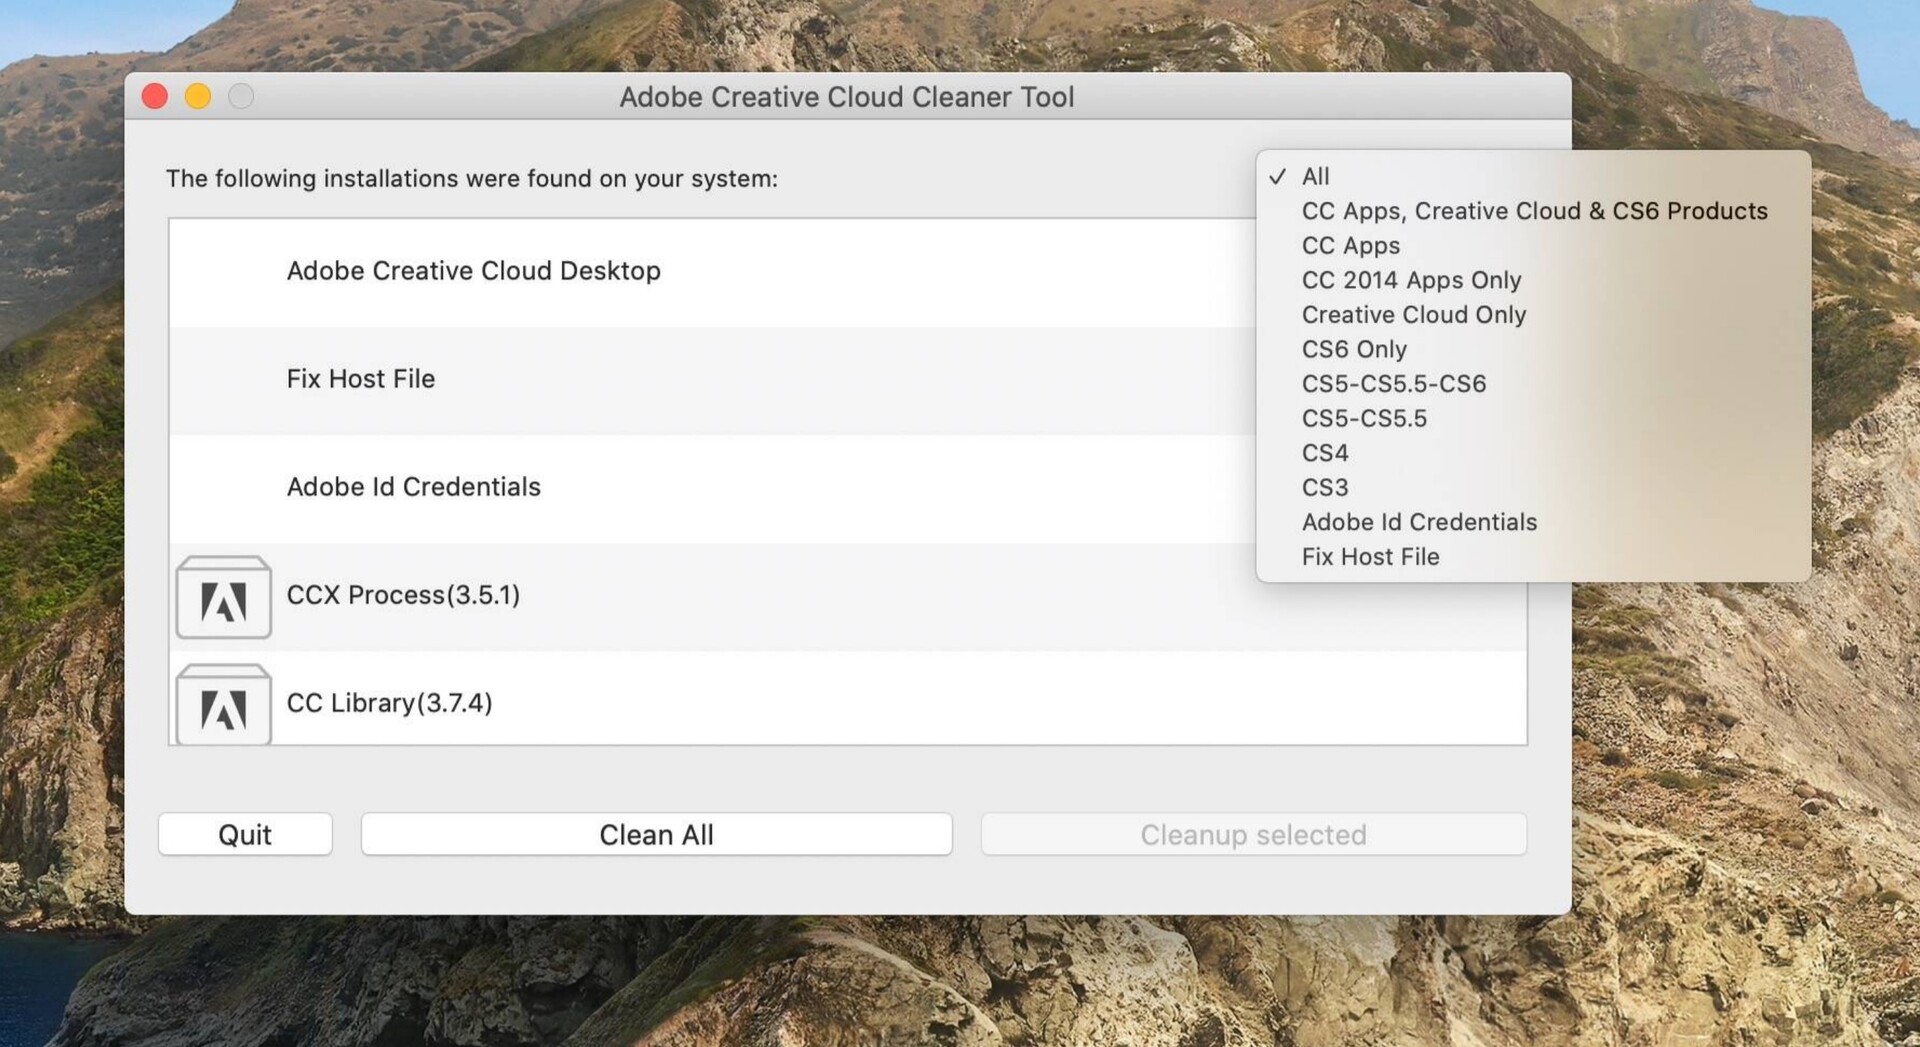 download the last version for ipod Adobe Creative Cloud Cleaner Tool 4.3.0.395